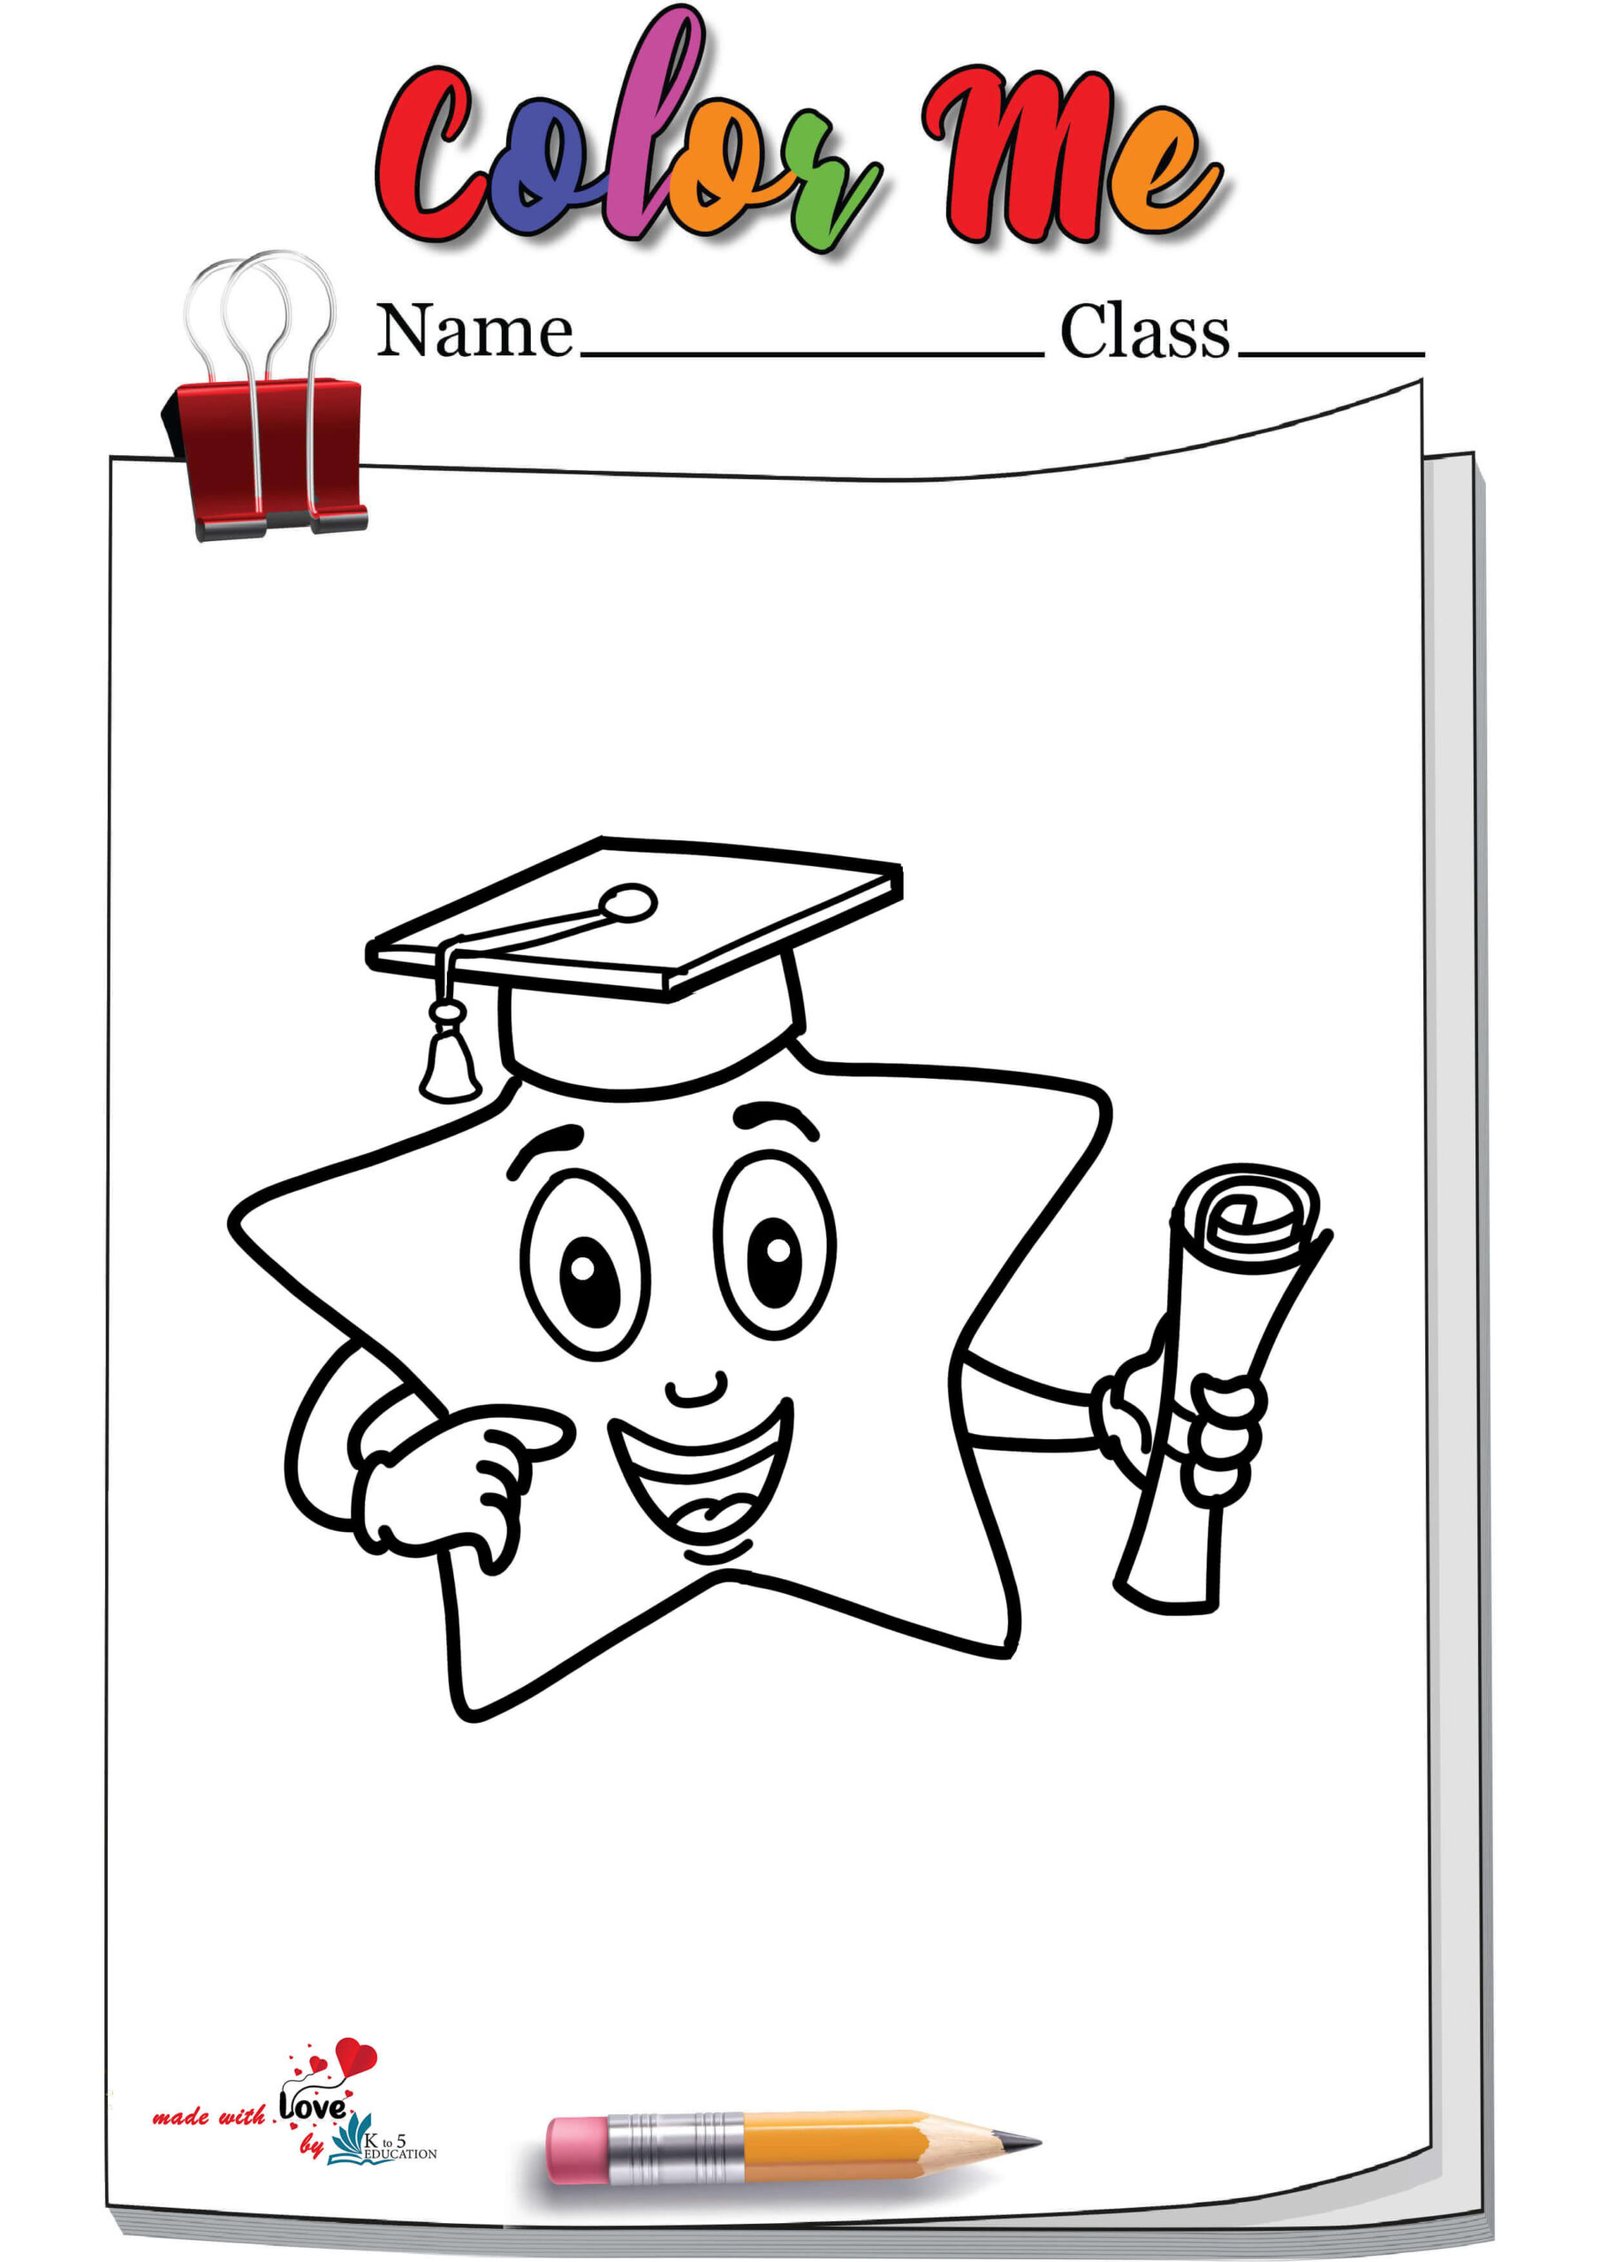 Star Emoji With Graduation Hat Coloring Page